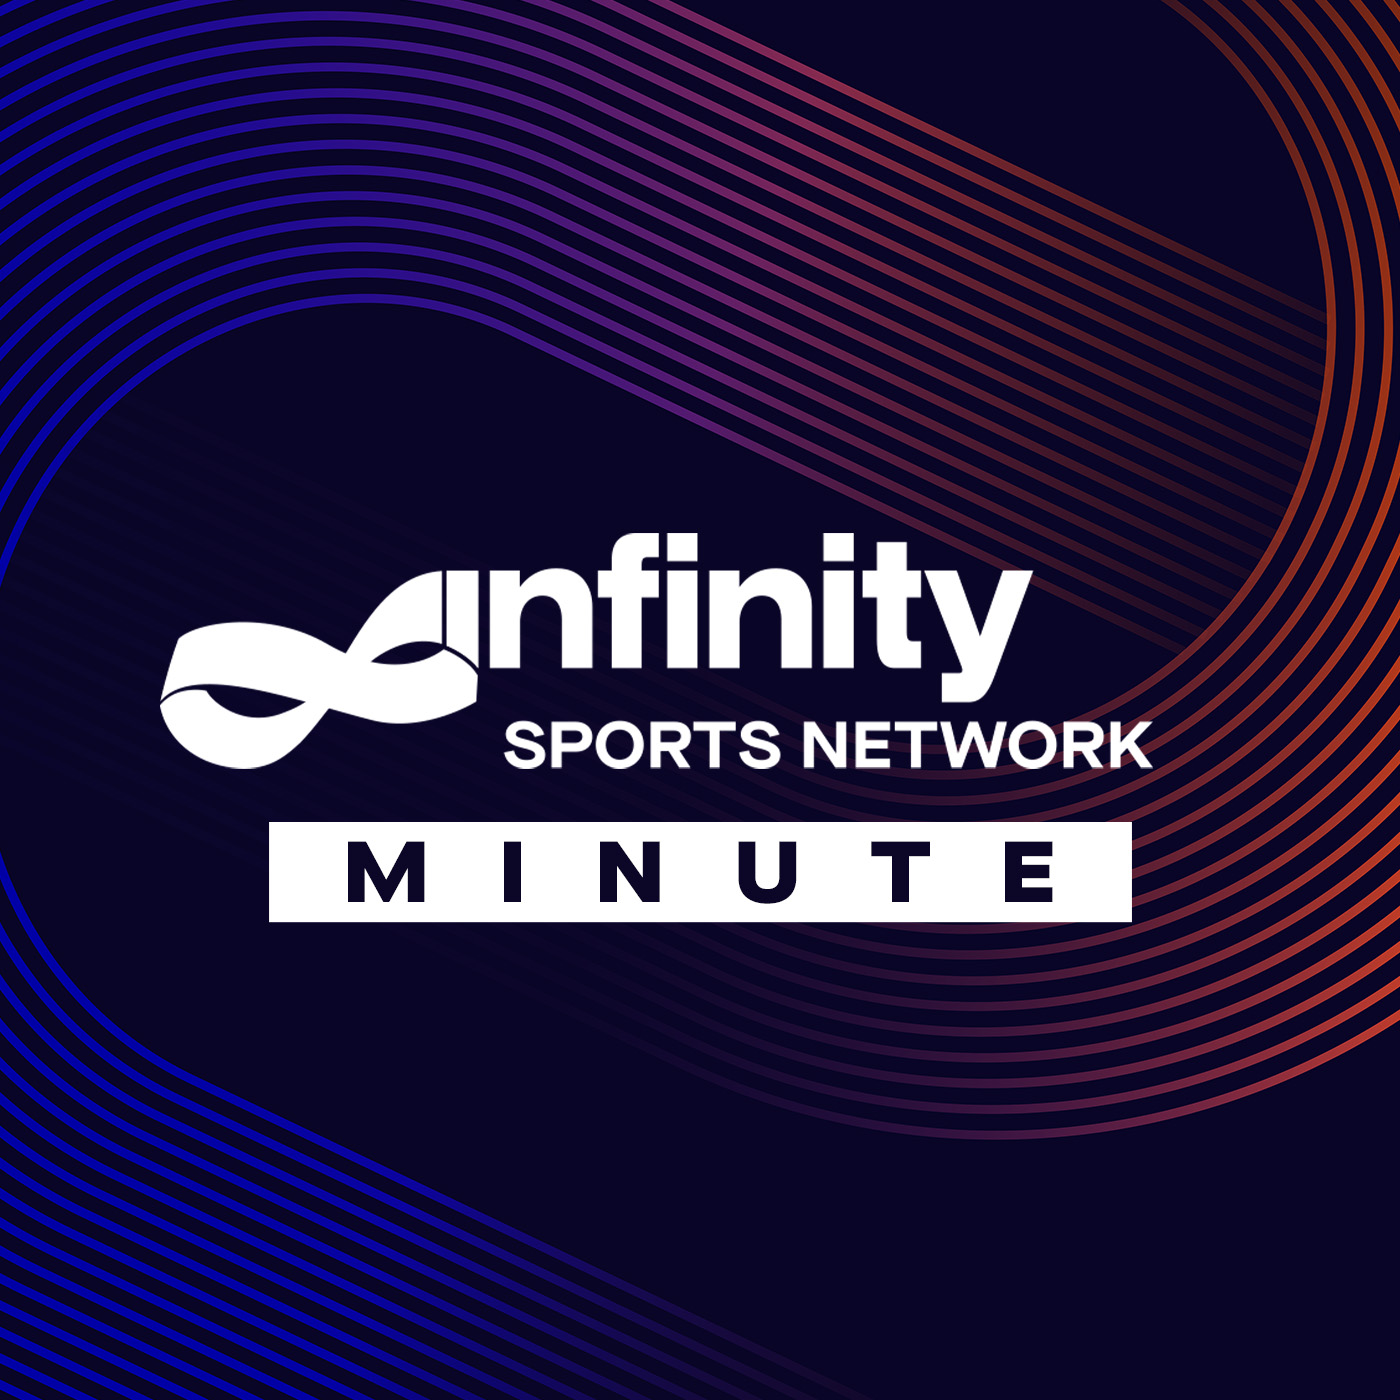 6-20 Andrew Perloff Sports Minute on the Los Angeles Lakers